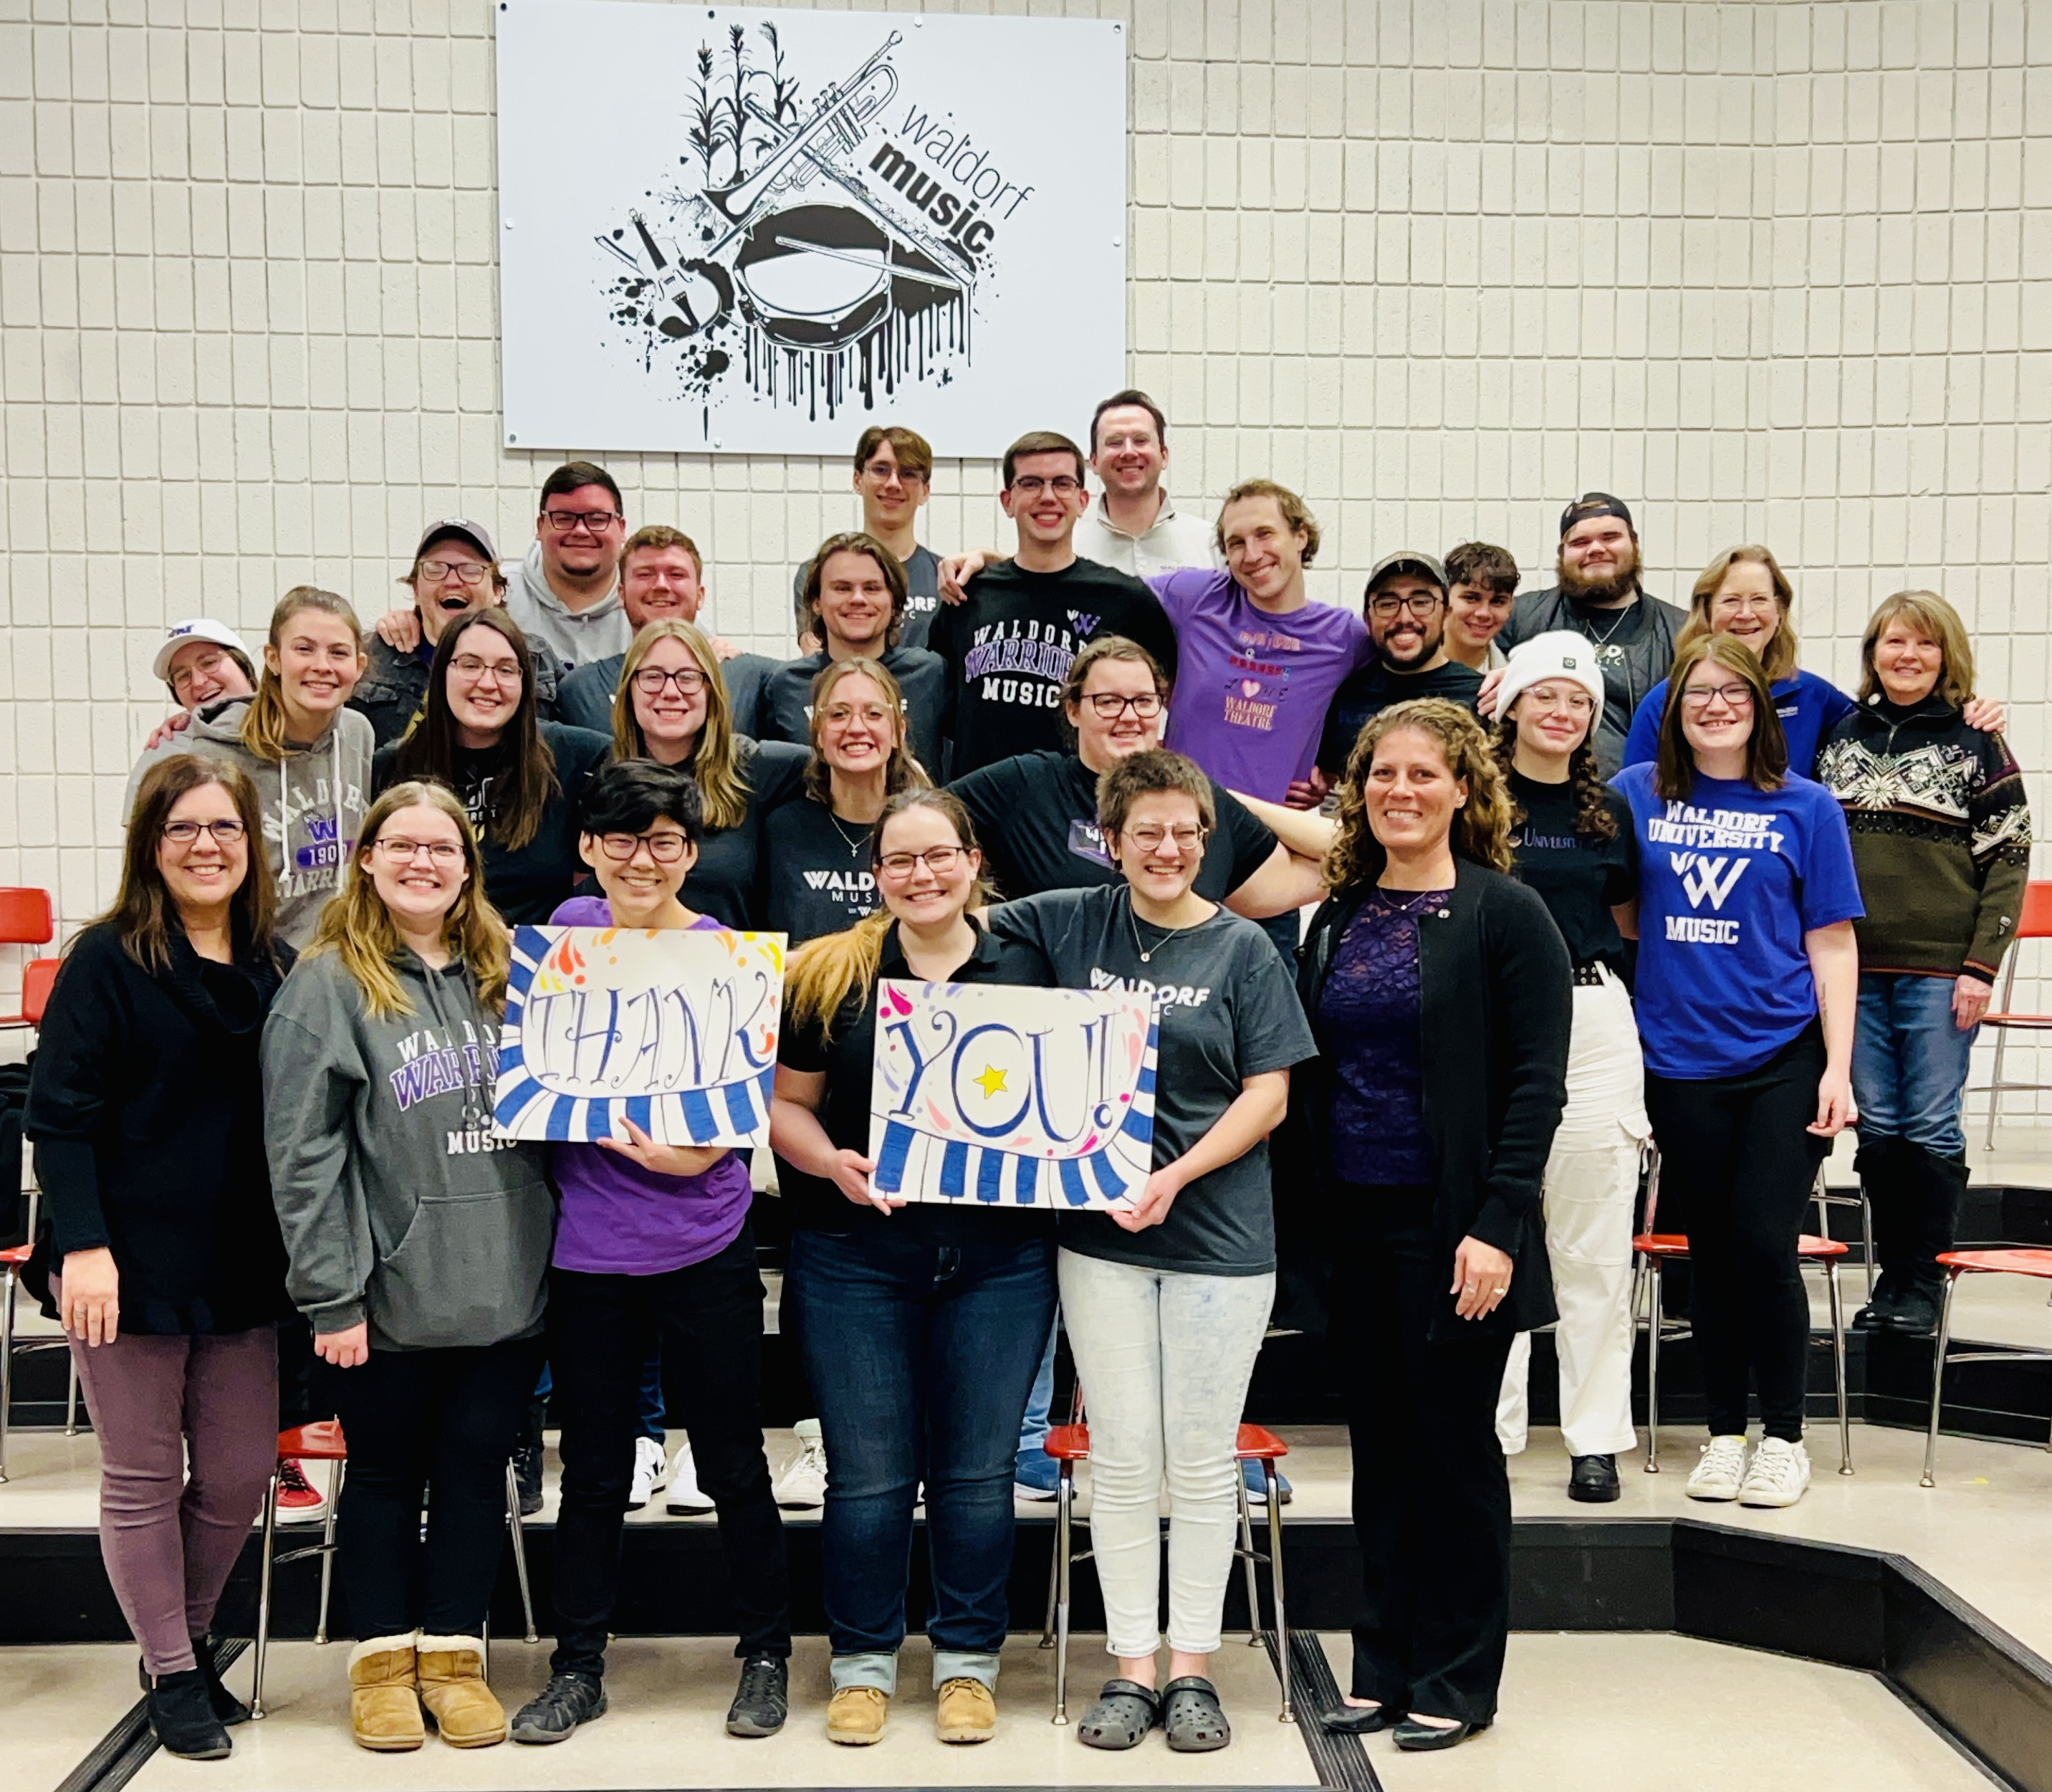 Waldorf Choir students and professors holding "Thank You" sign